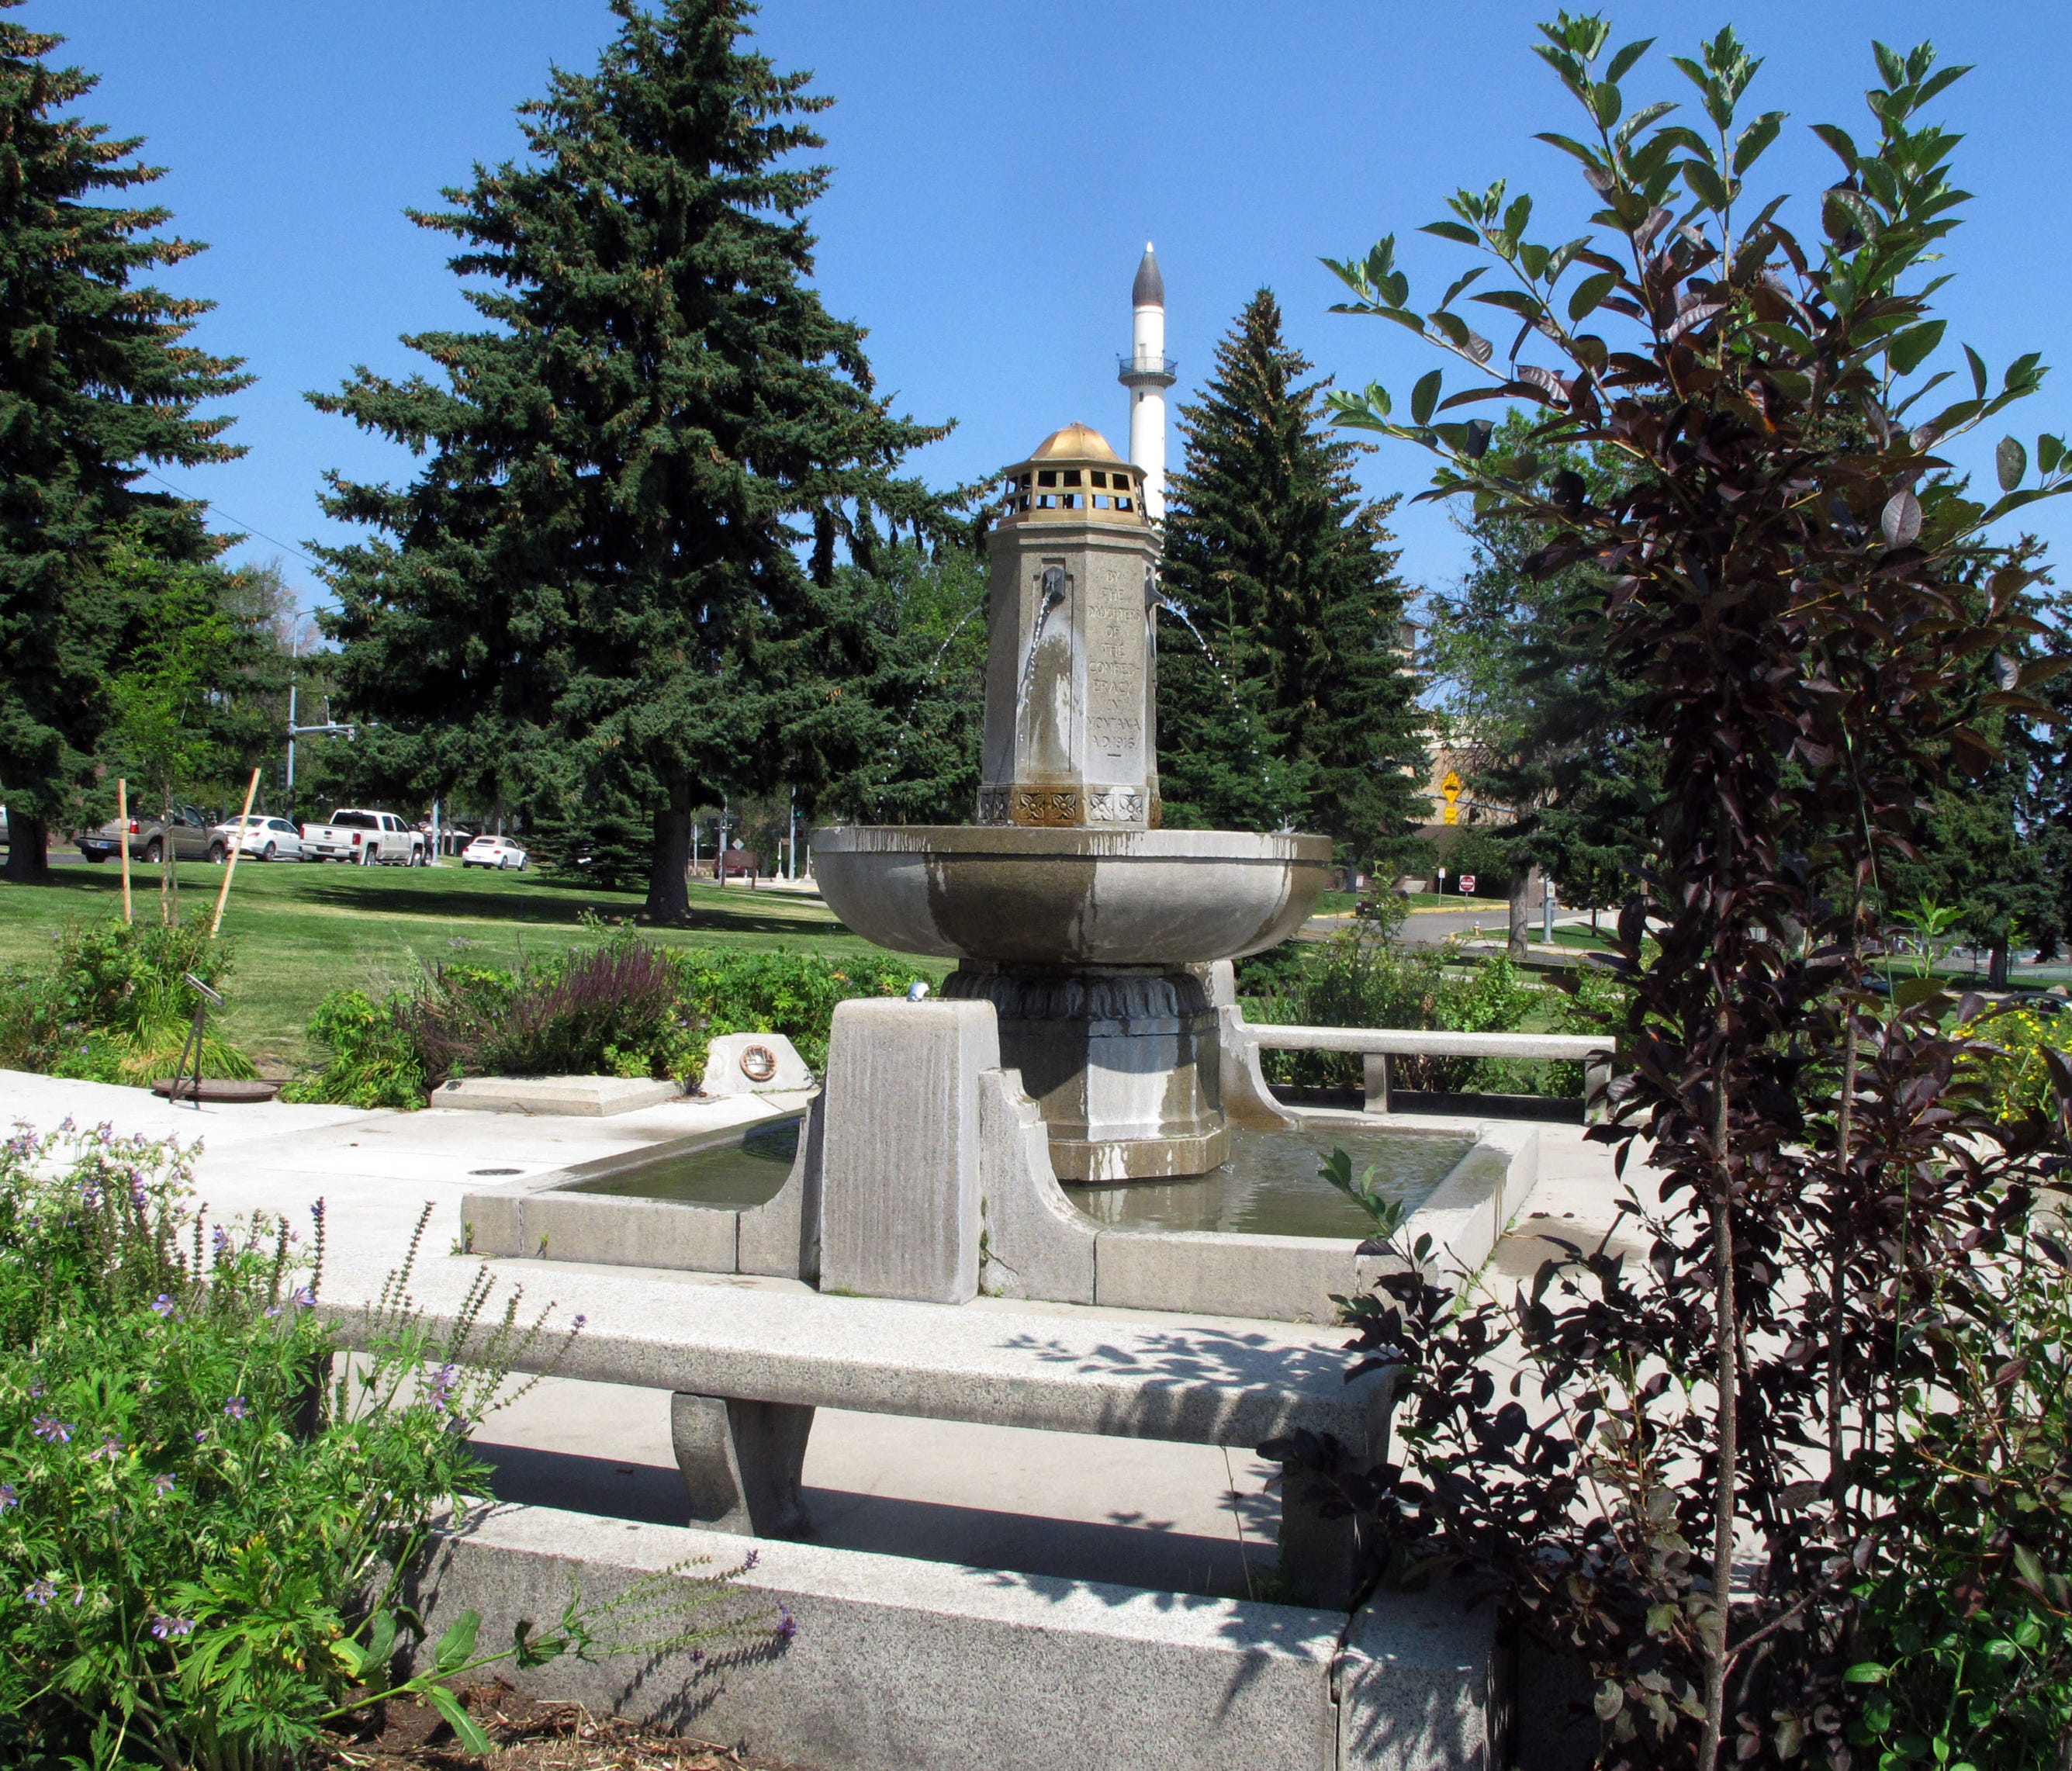 In this July 2, 2015, file photo, the Confederate Memorial Fountain is shown in Helena, Mont.